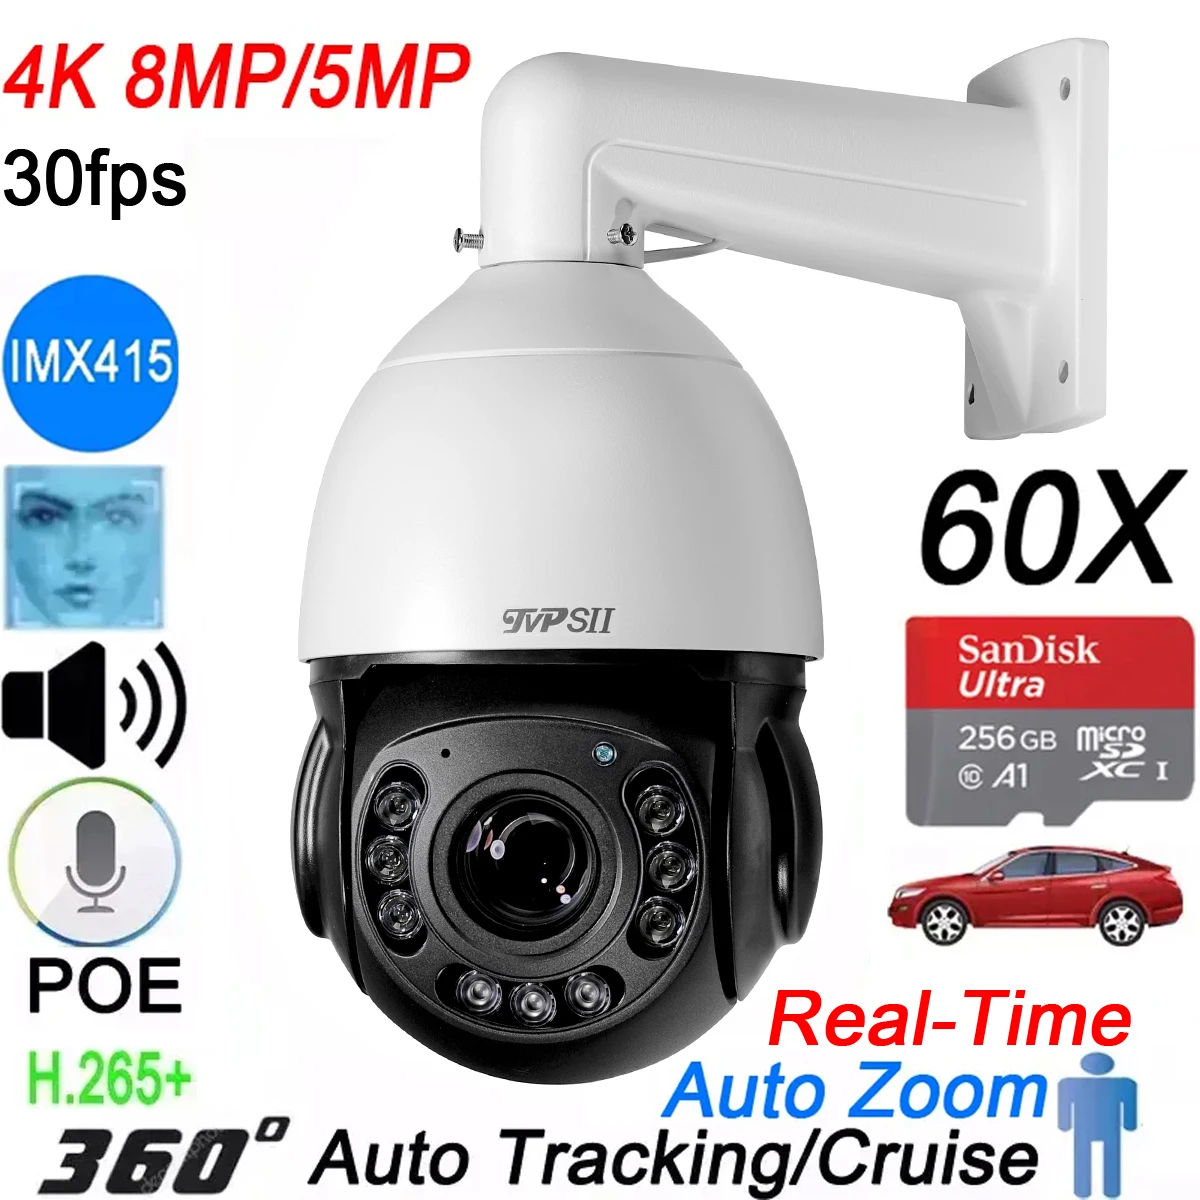 

Auto Tracking Real-Time 30fps 8MP 4K IMX415 60X Optical Zoom 360° Rotation Audio Outdoor ONVIF POE IP Speed Dome PTZ Camera